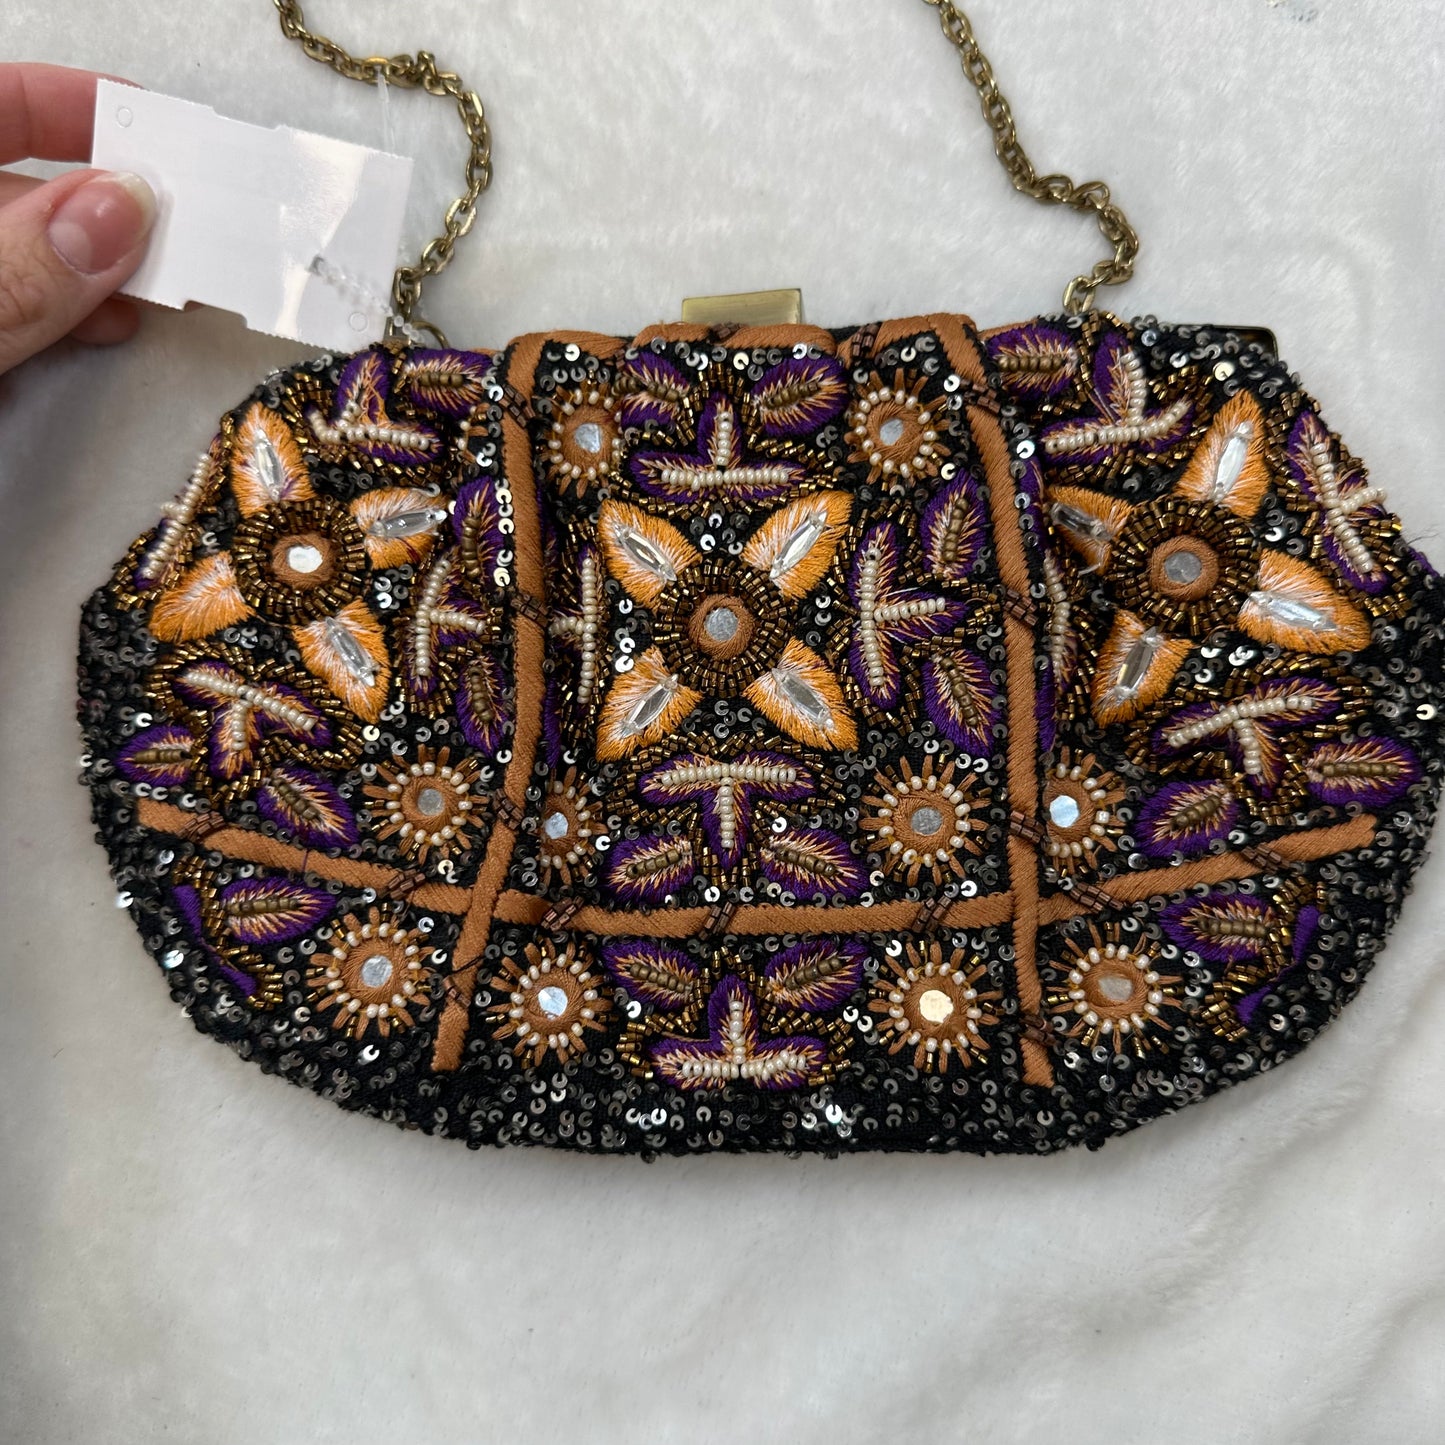 Clutch Designer By Anthropologie  Size: Small